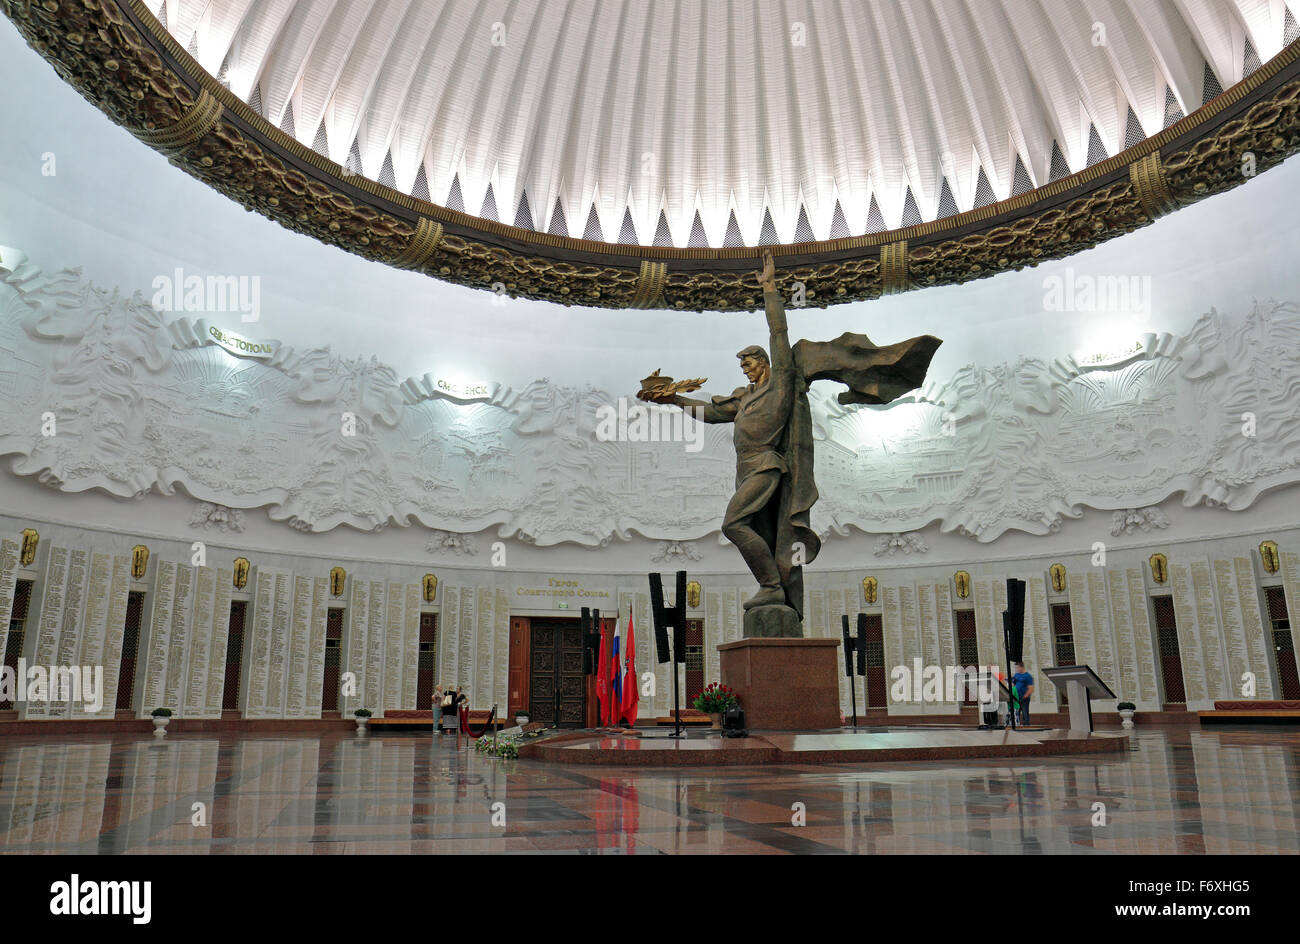 The 'Soldier of Victory' statue in the 'Hall of Glory, Museum of the Great Patriotic War, Park Pobedy, Moscow, Russia. Stock Photo